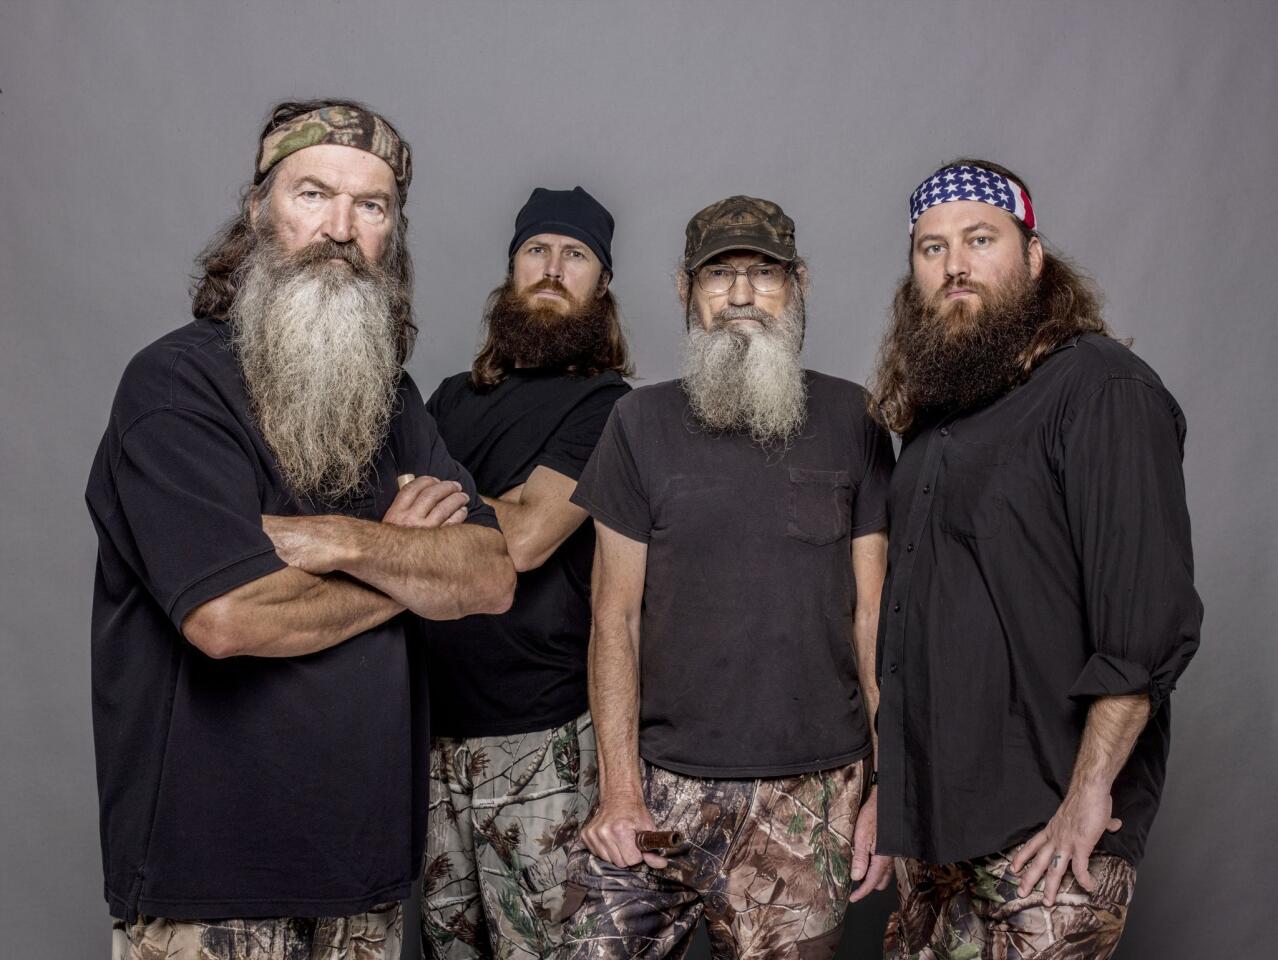 America's most popular reality show on cable has been treading water since the "Duck Dynasty" family's patriarch, Phil Robertson, sounded off on gay and black people in an unabashed GQ interview. An "extremely disappointed" A&E pulled poppa Robertson off the show indefinitely. His family says they're not sure about filming without him.